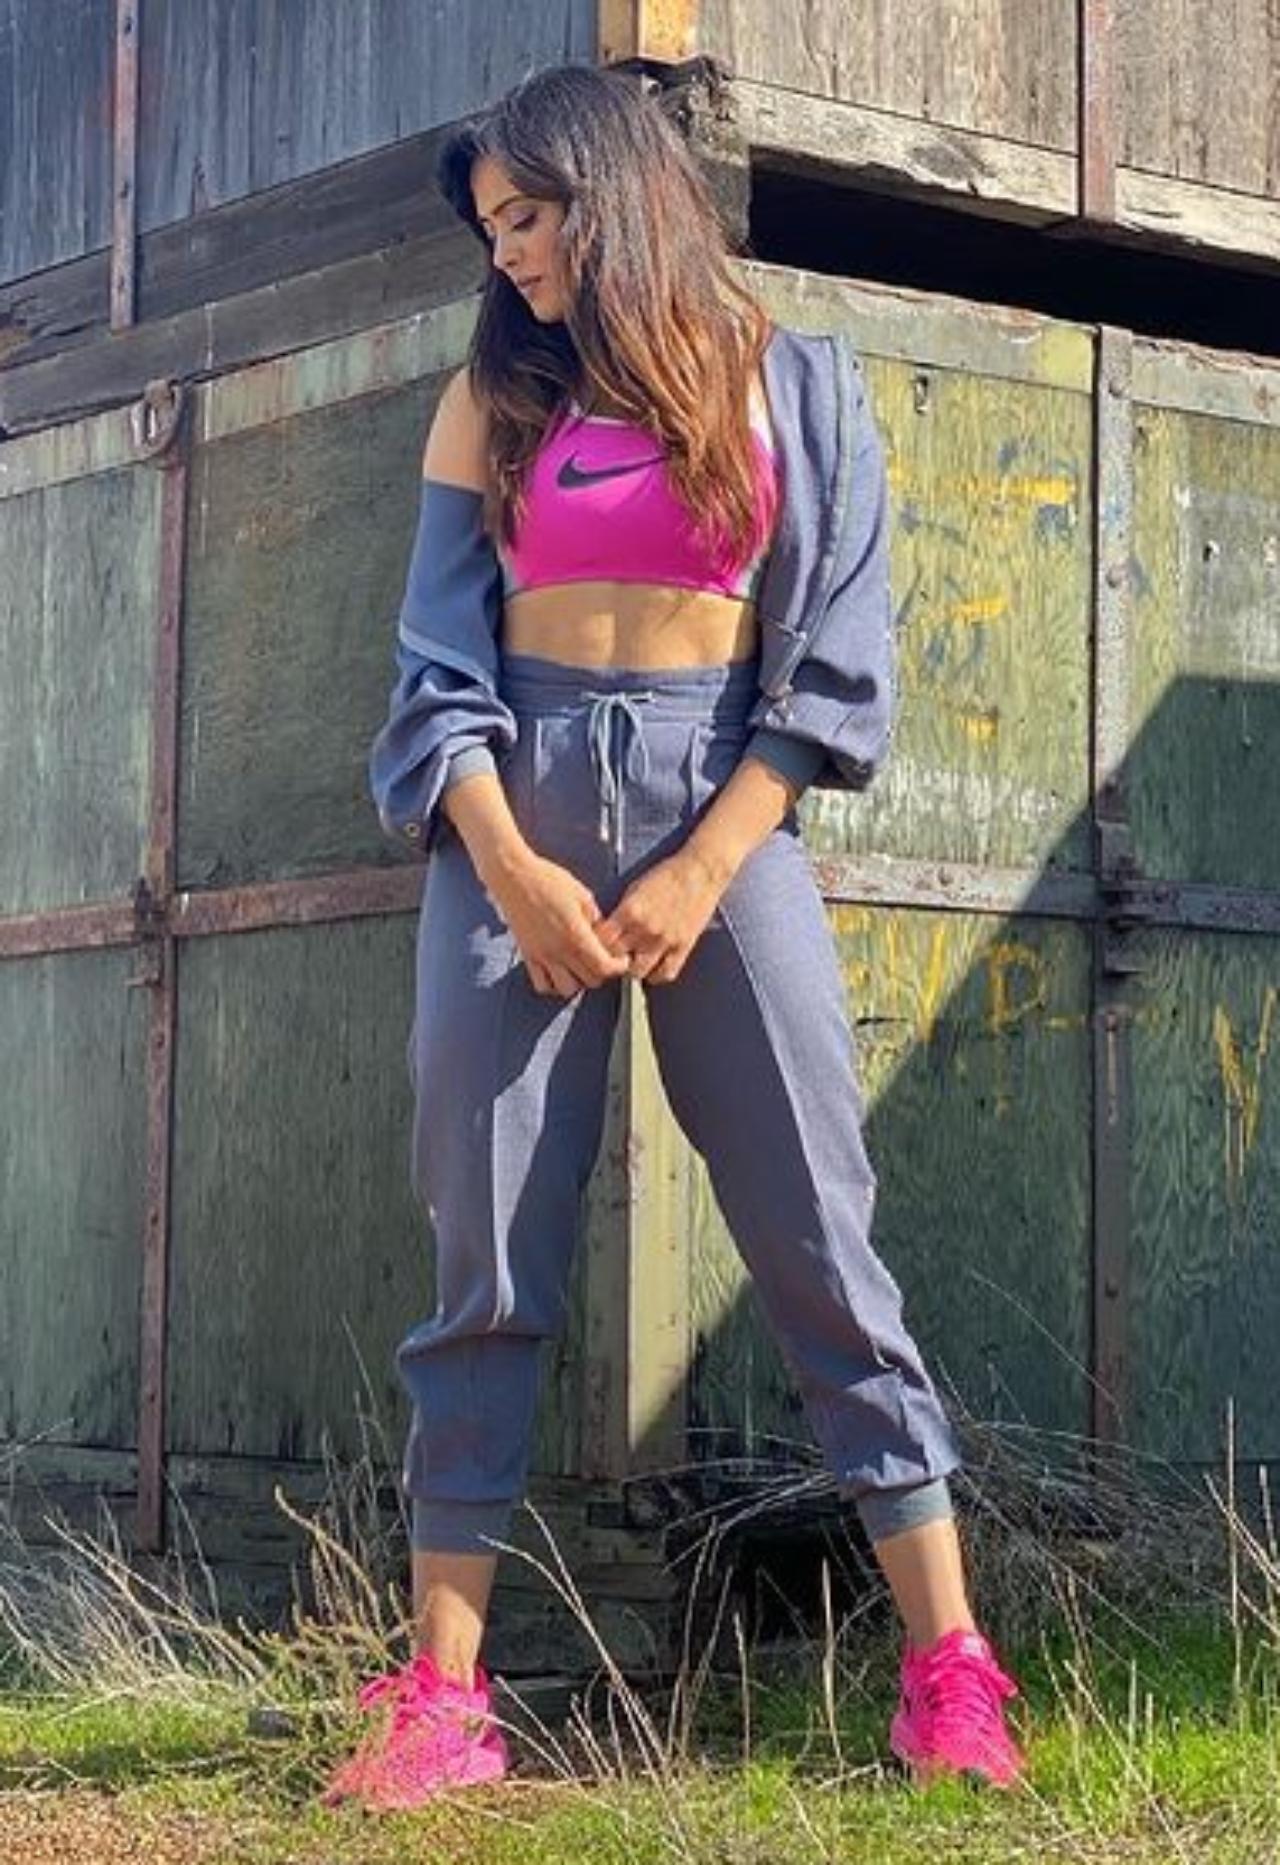 The timeless beauty Shweta Tiwari paired a blue tracksuit with a pink crop top and a matching pair of sneakers